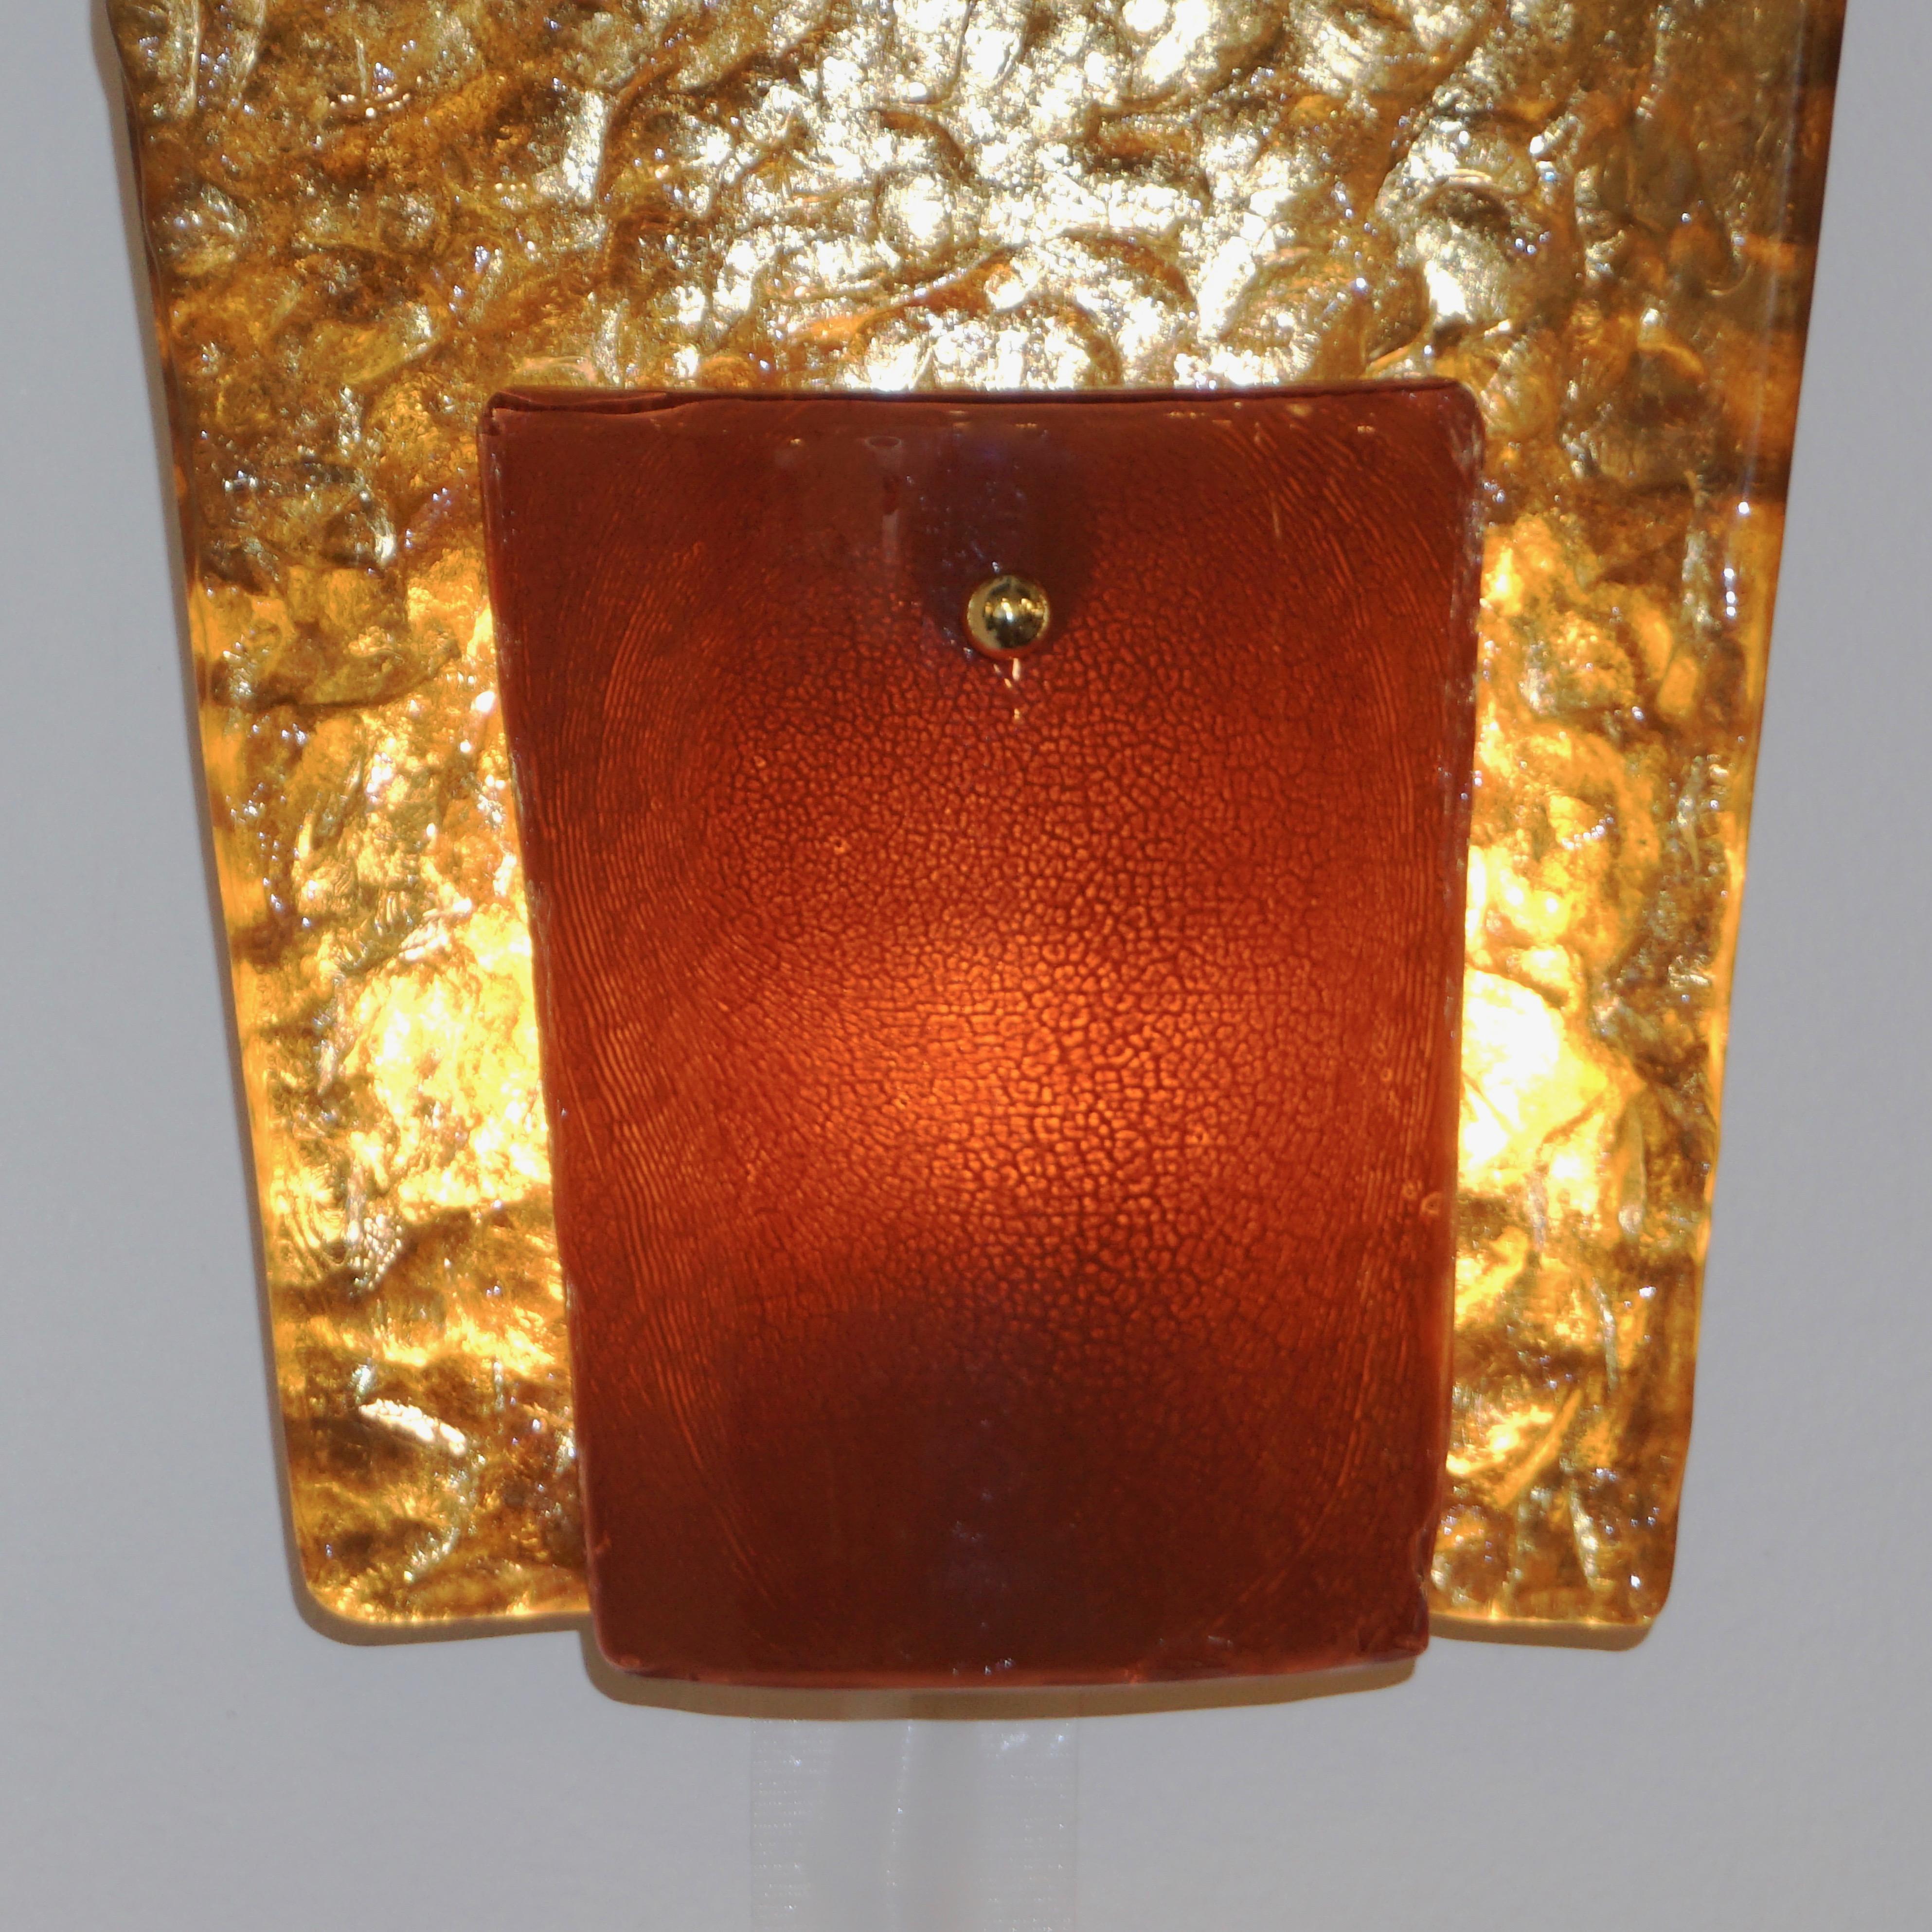 Contemporary Italian Pair of Gold and Amber/Orange Murano Glass Organic Sconces For Sale 2